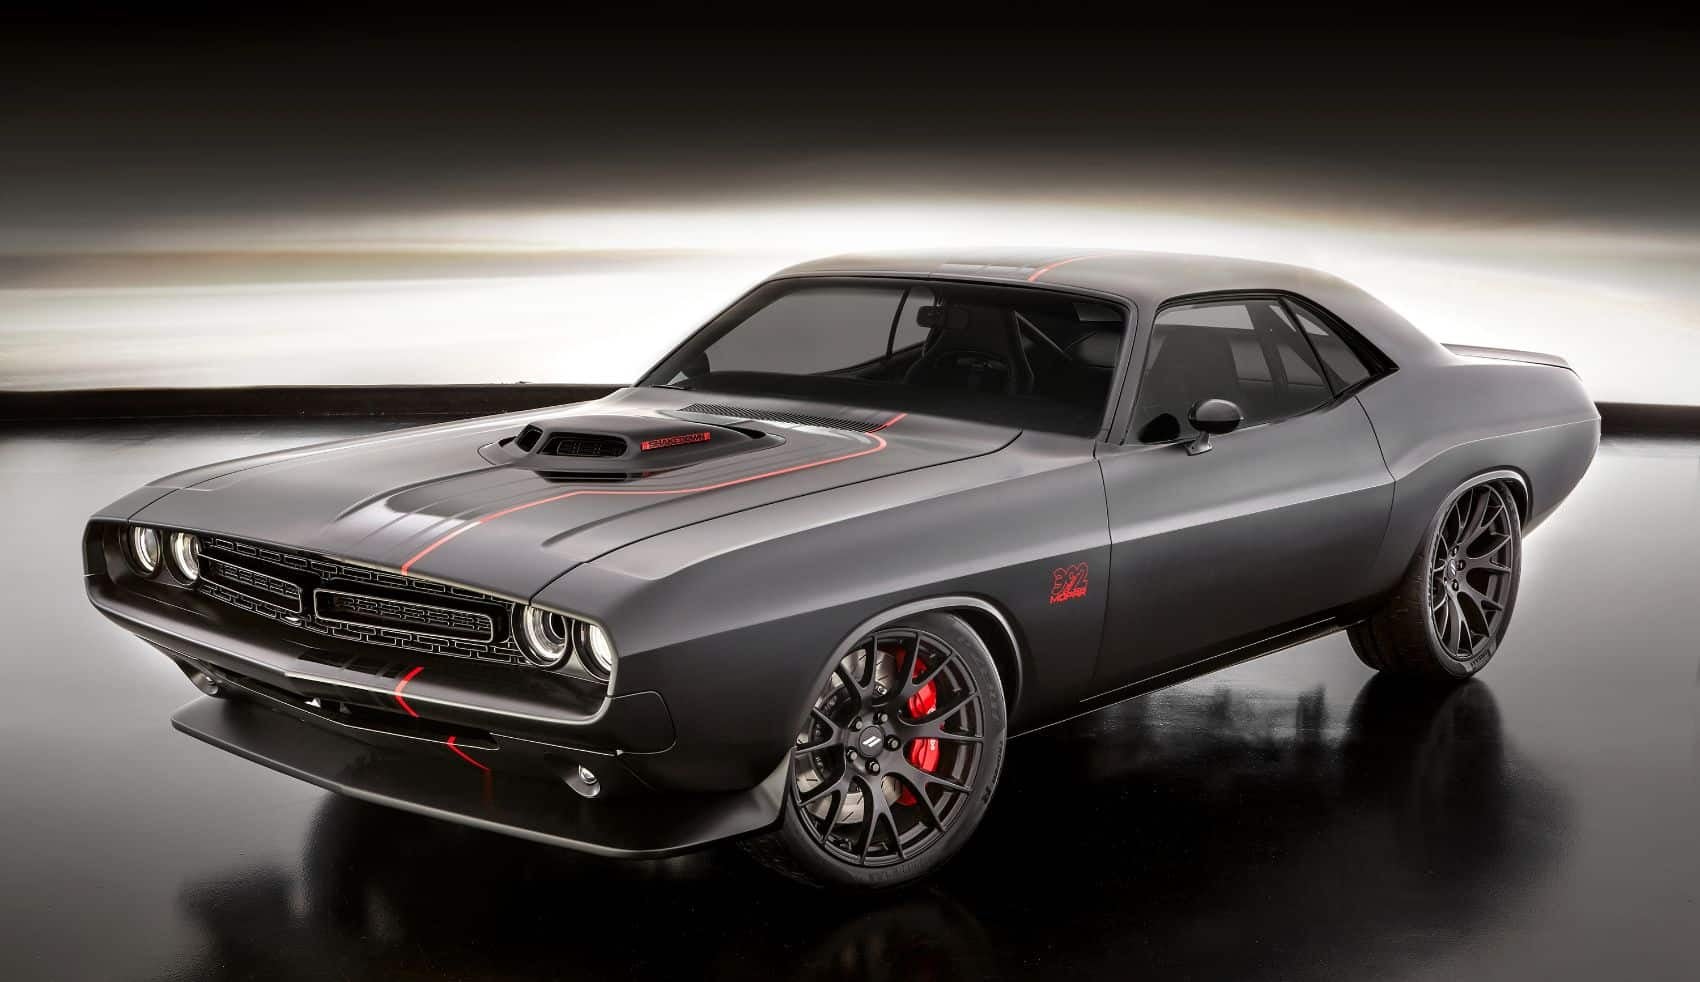 2023 Dodge Challenger Shakedown Unveiled as First "Last Call" Model